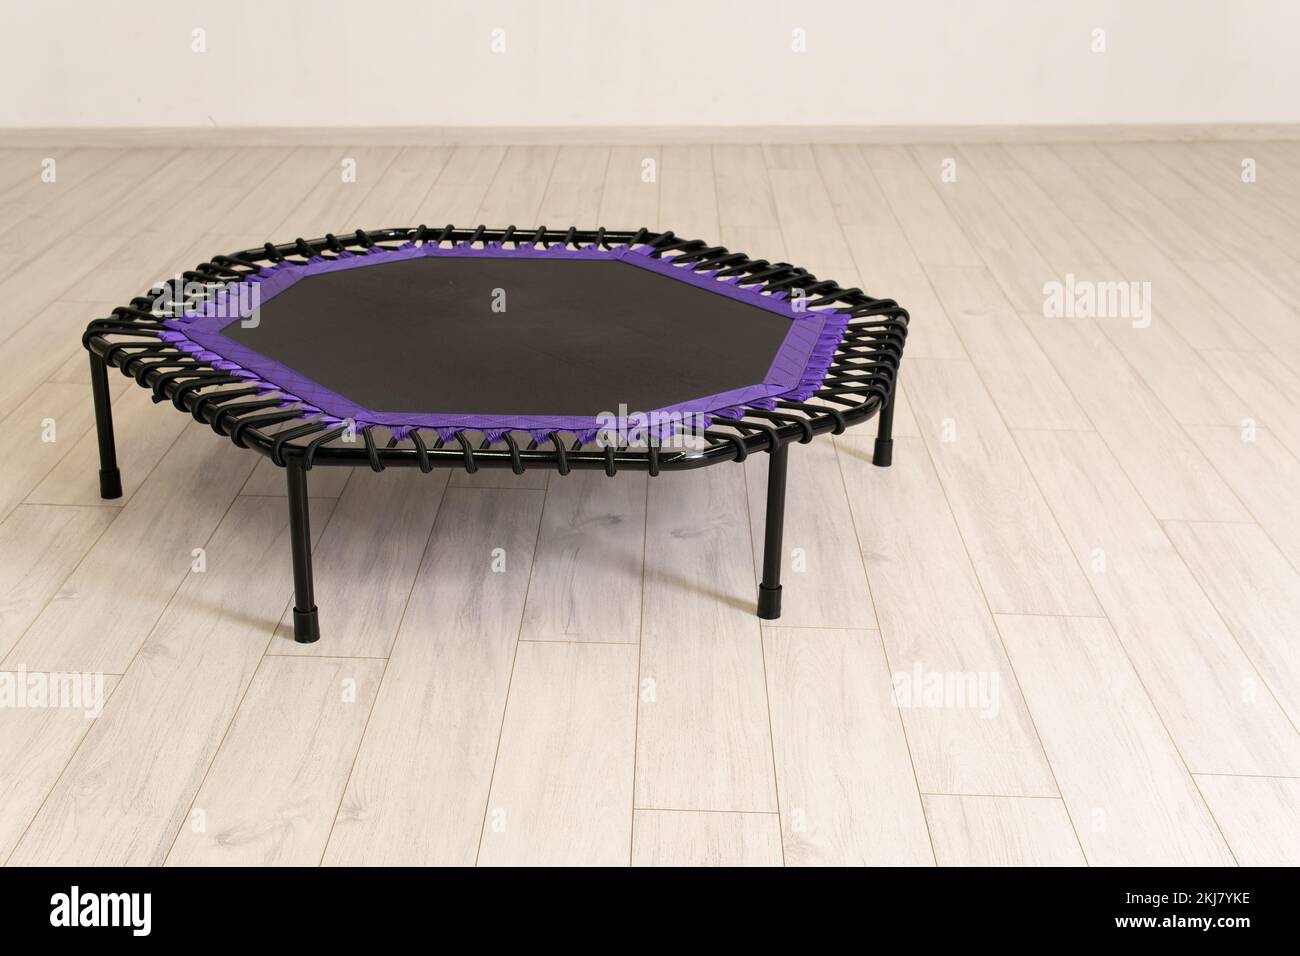 empty space growth little jump trampoline cyan small white purple fitness leisure game Stock Photo